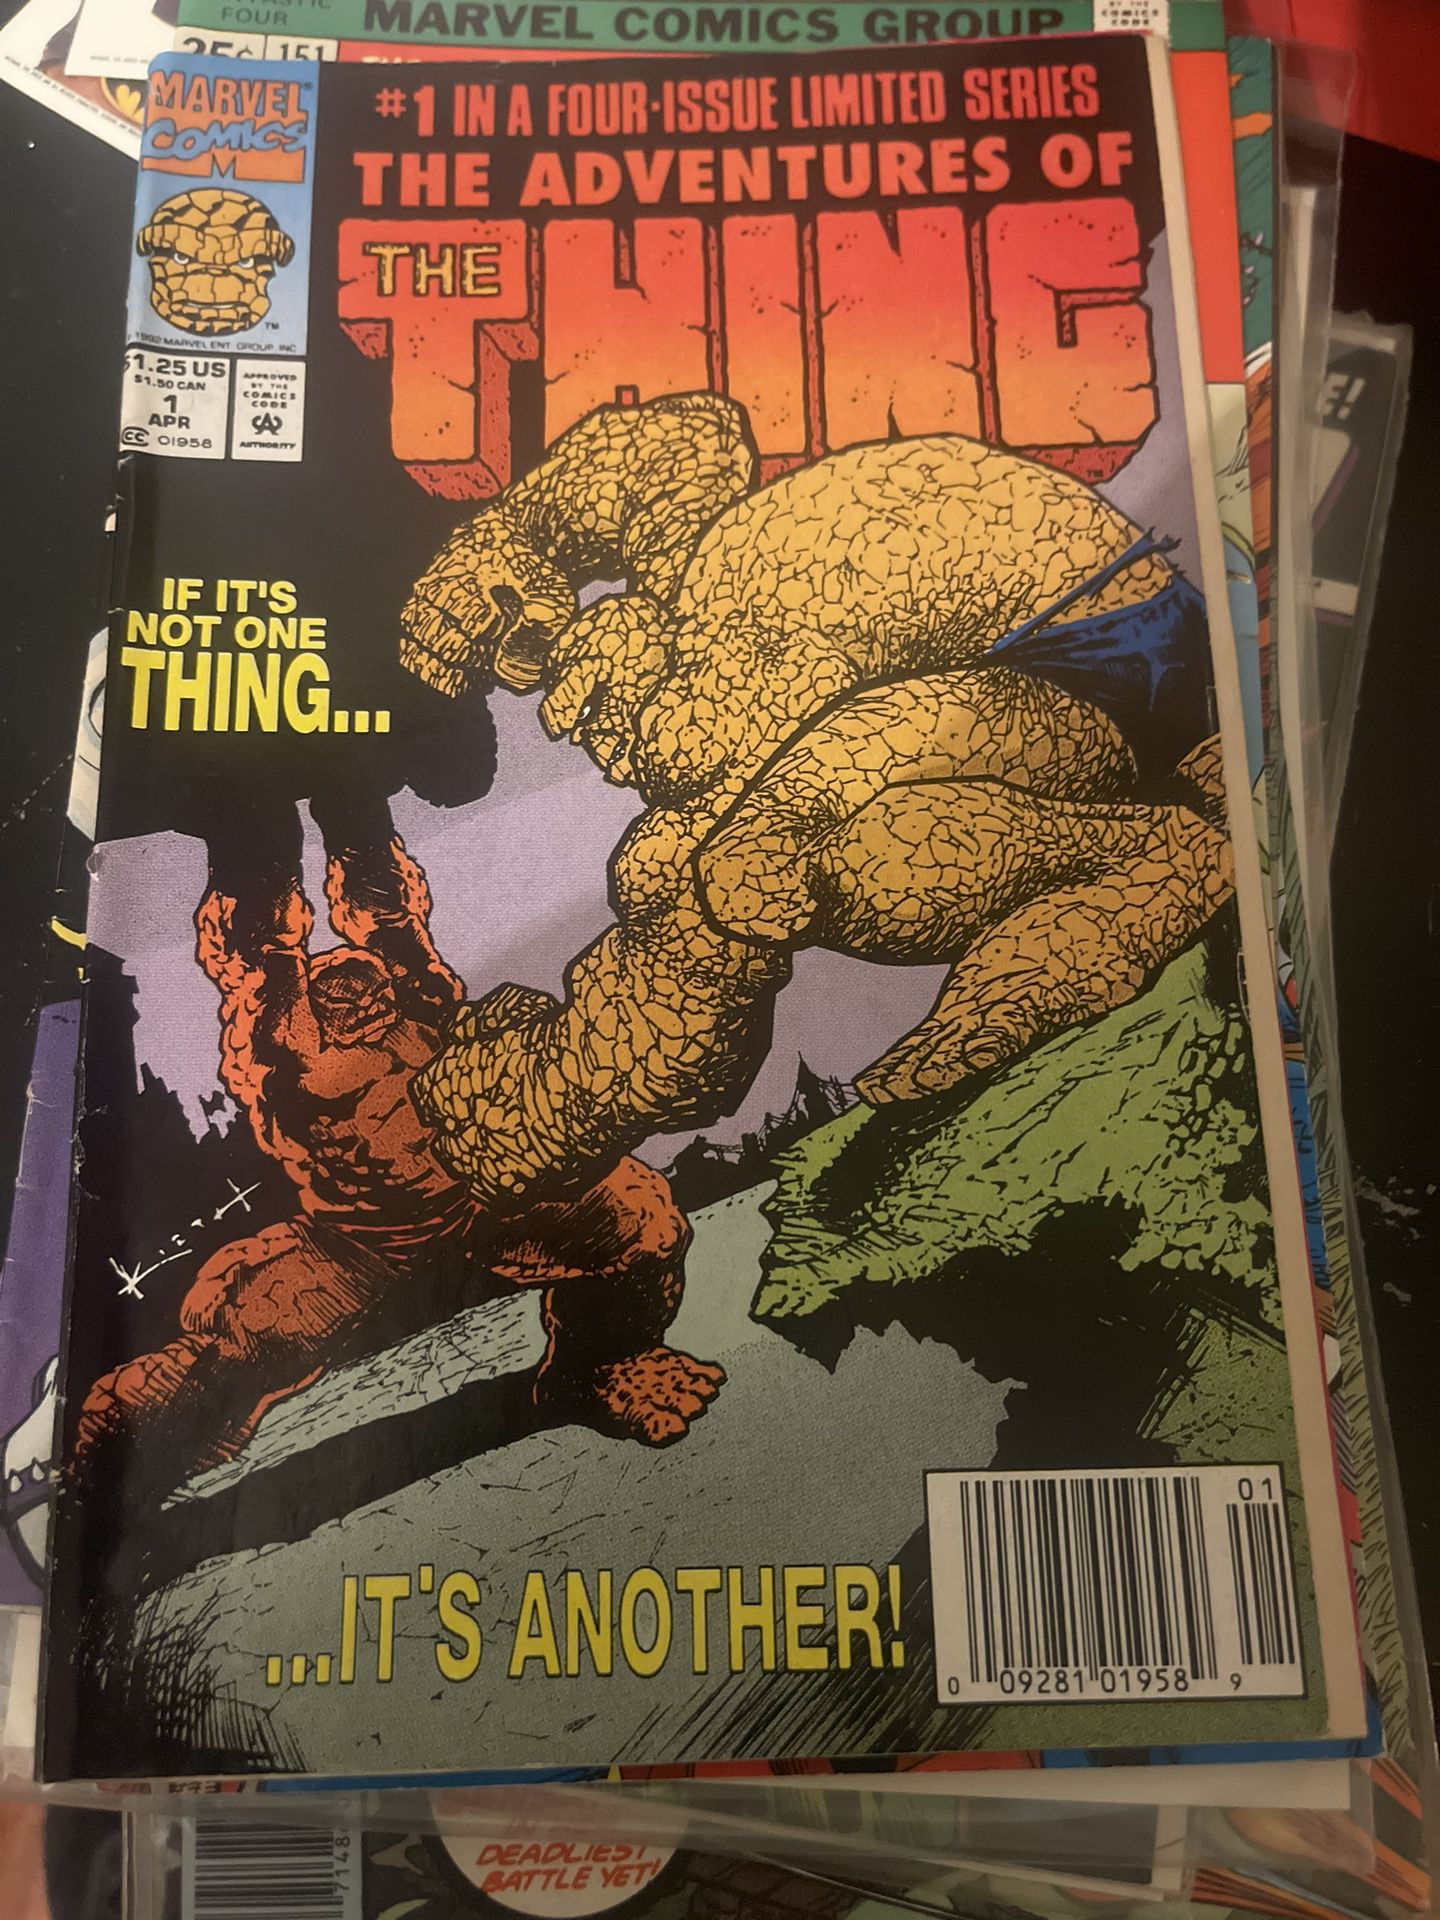 The Adventure Of The Thing #1